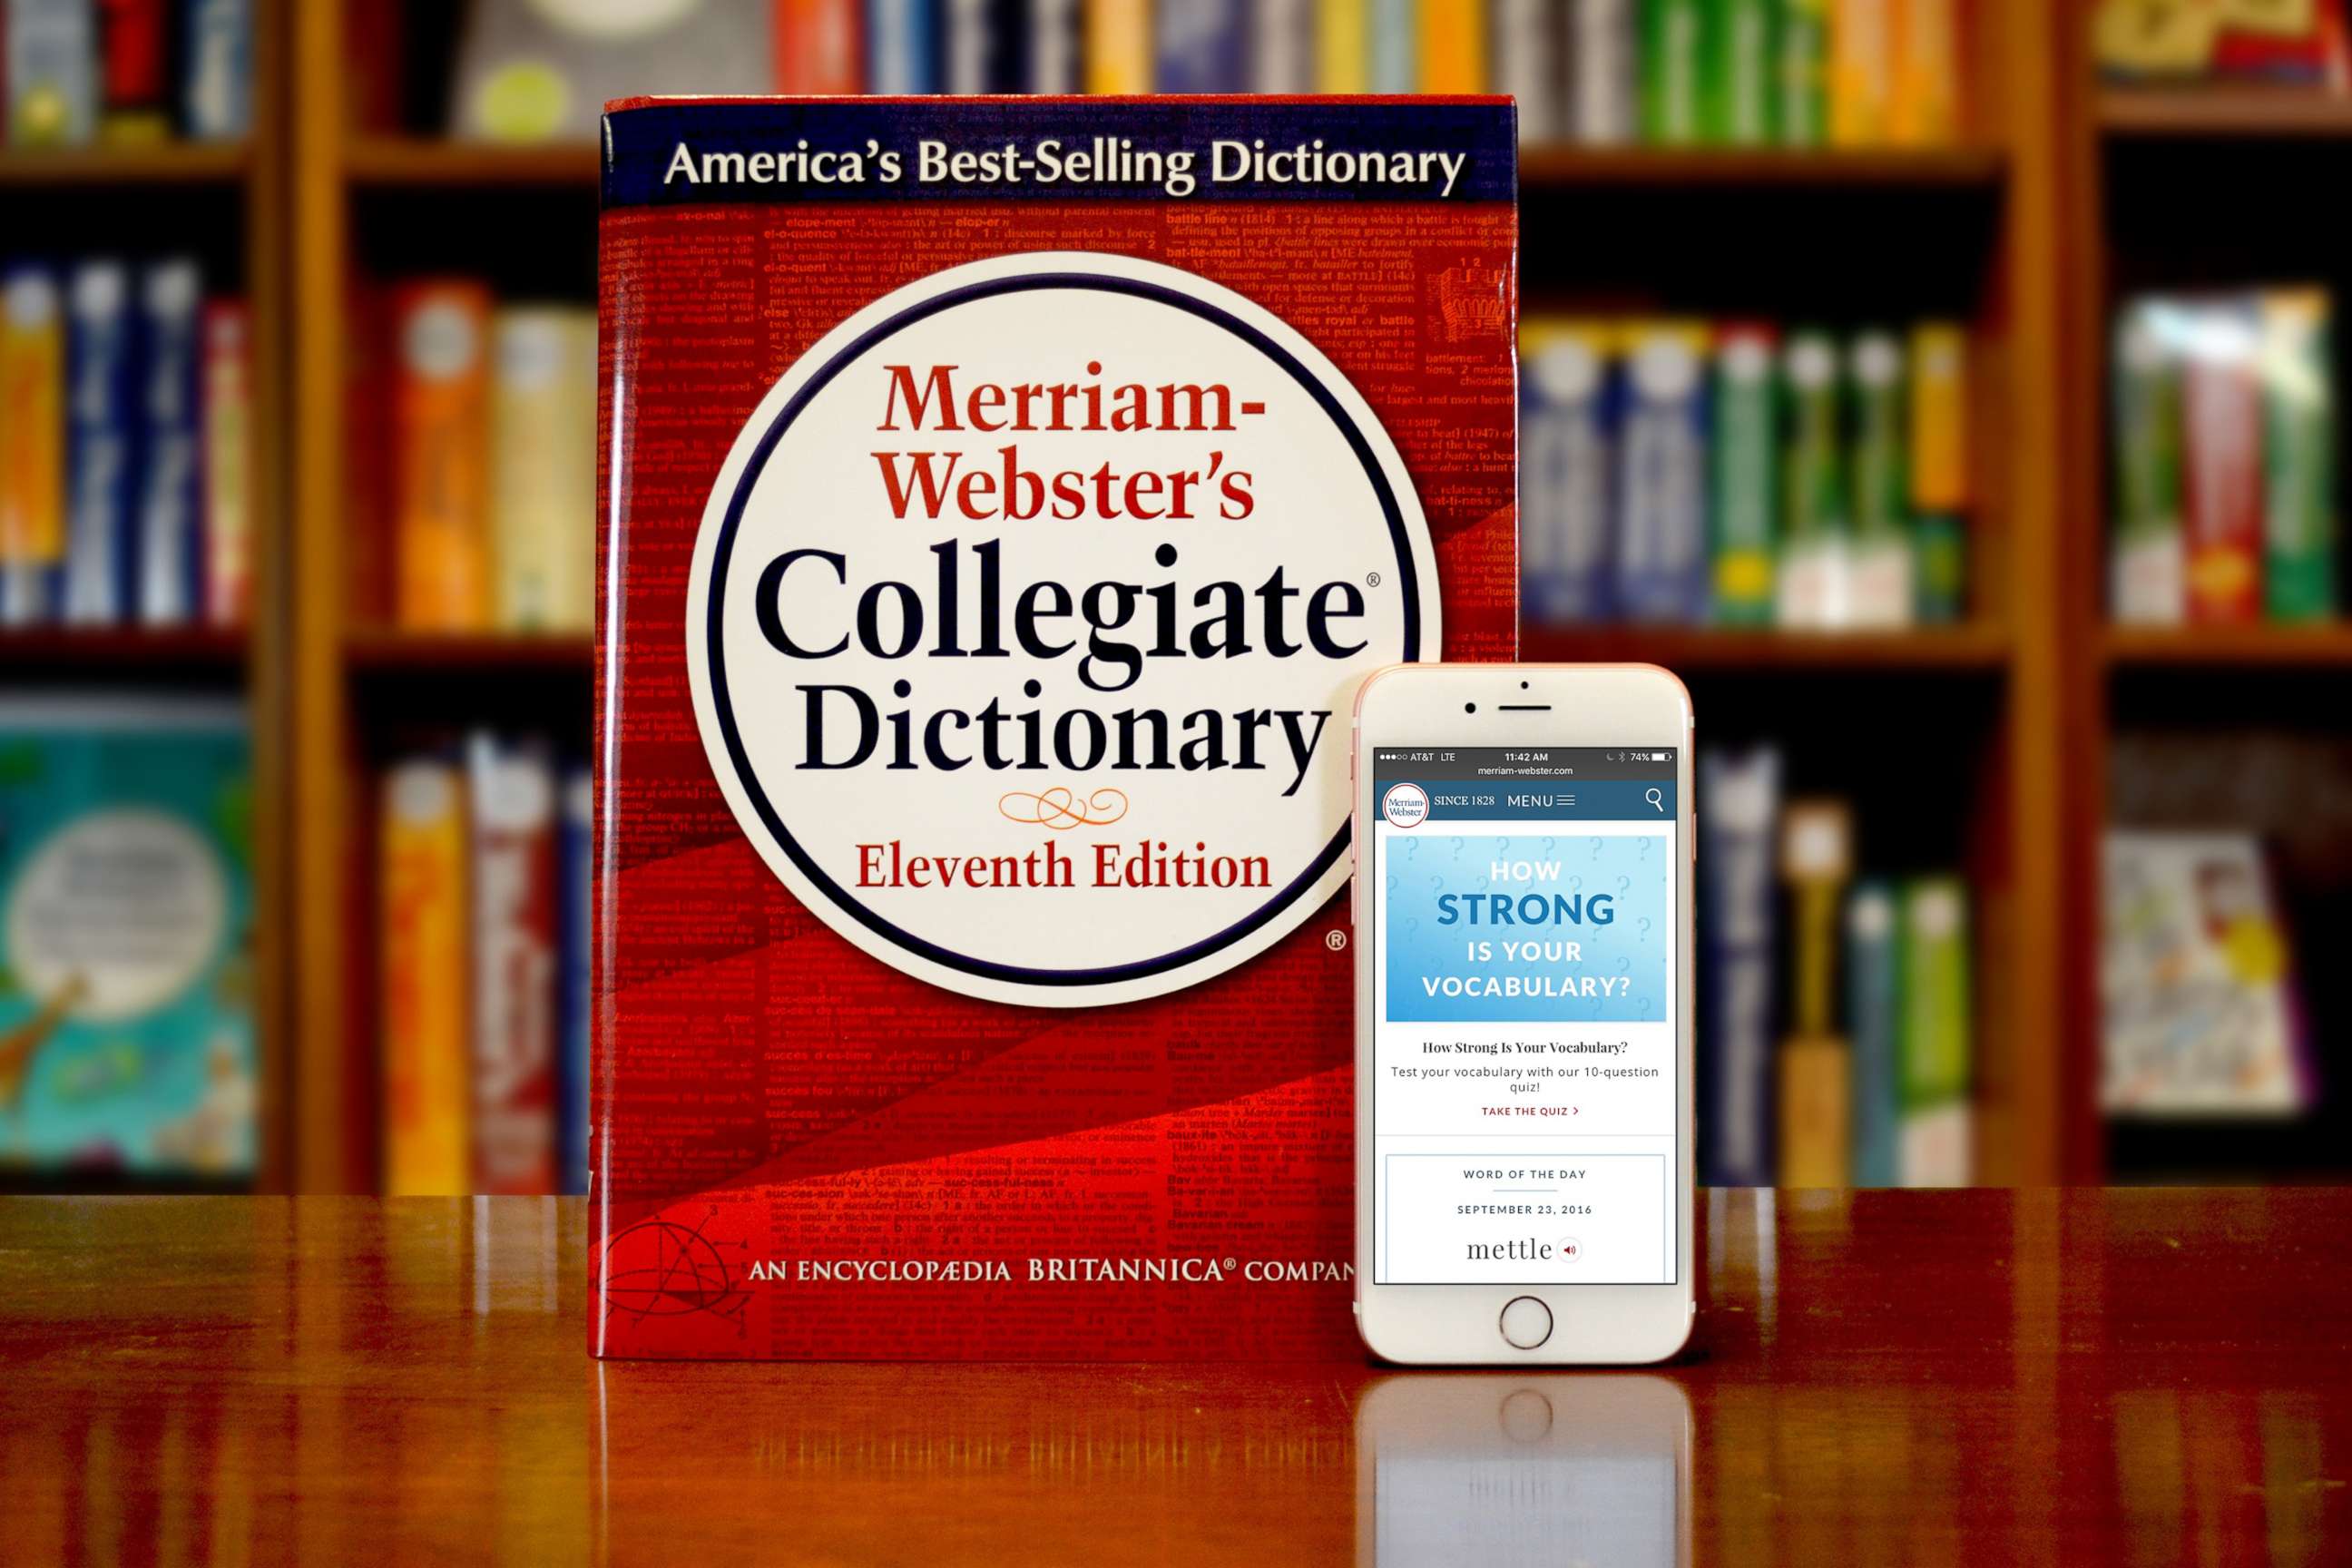 PHOTO: In this September 23, 2016, file photo provided by Merriam-Webster, Merriam-Webster's Collegiate Dictionary and mobile website are displayed in Springfield, Mass.